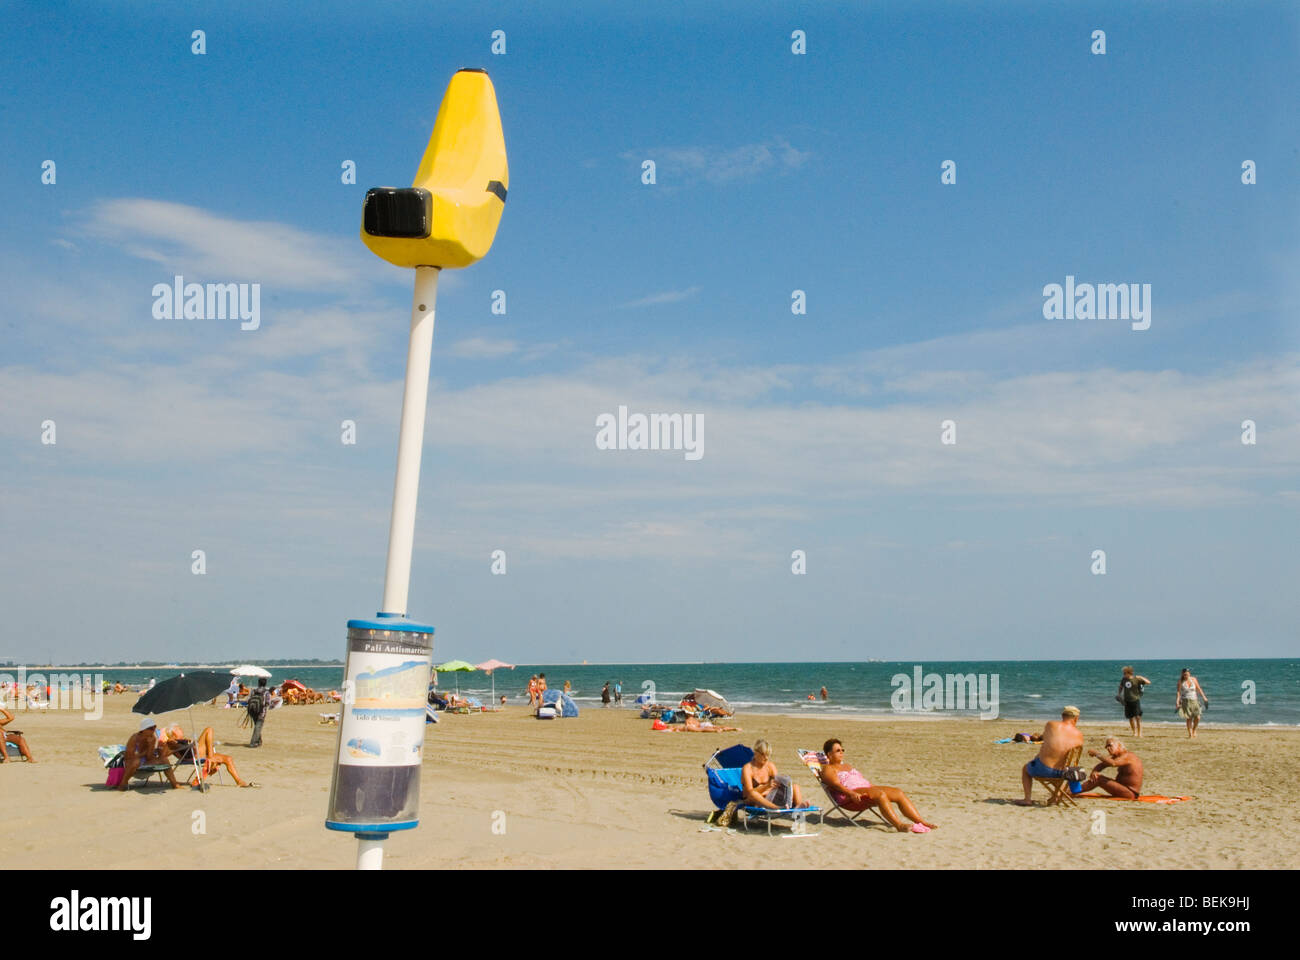 Venice Lido Italy the public beach. Huge banana sign lets people know where they are positioned on the beach 2000s 2009 HOMER SYKES Stock Photo